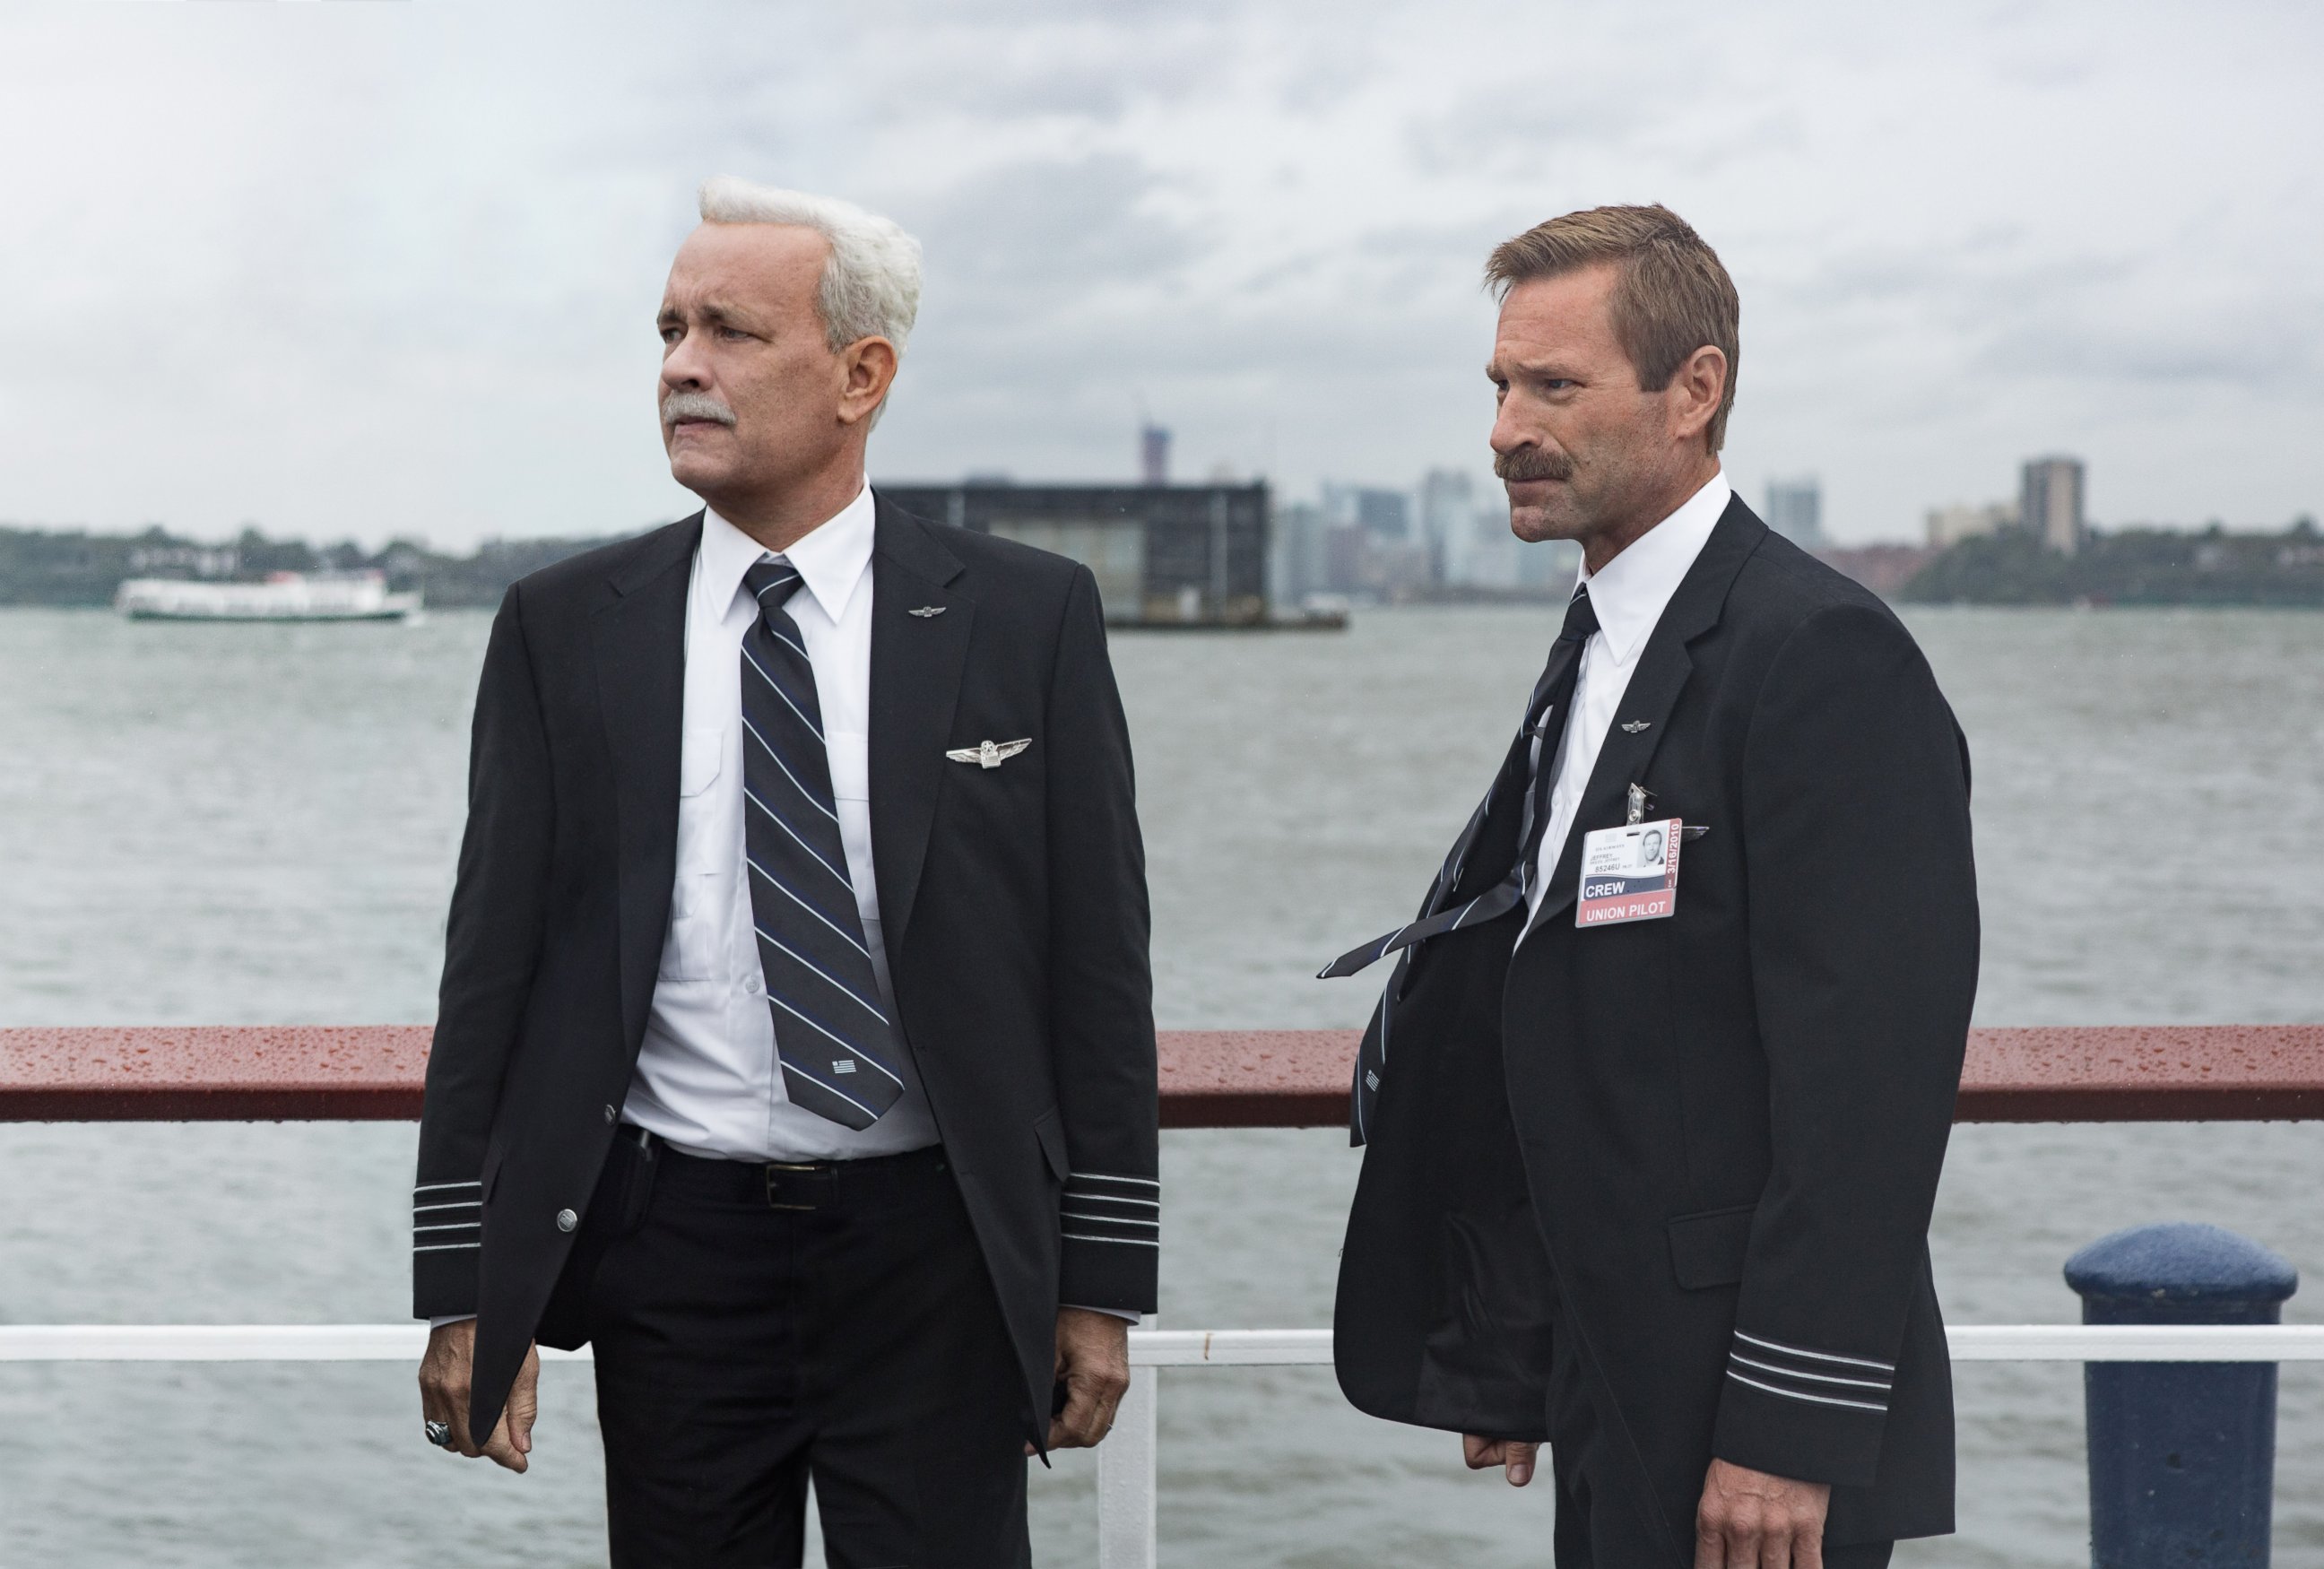 PHOTO: Tom Hanks and Aaron Eckhart in Warner Bros. Pictures and Village Roadshow Pictures drama "Sully."